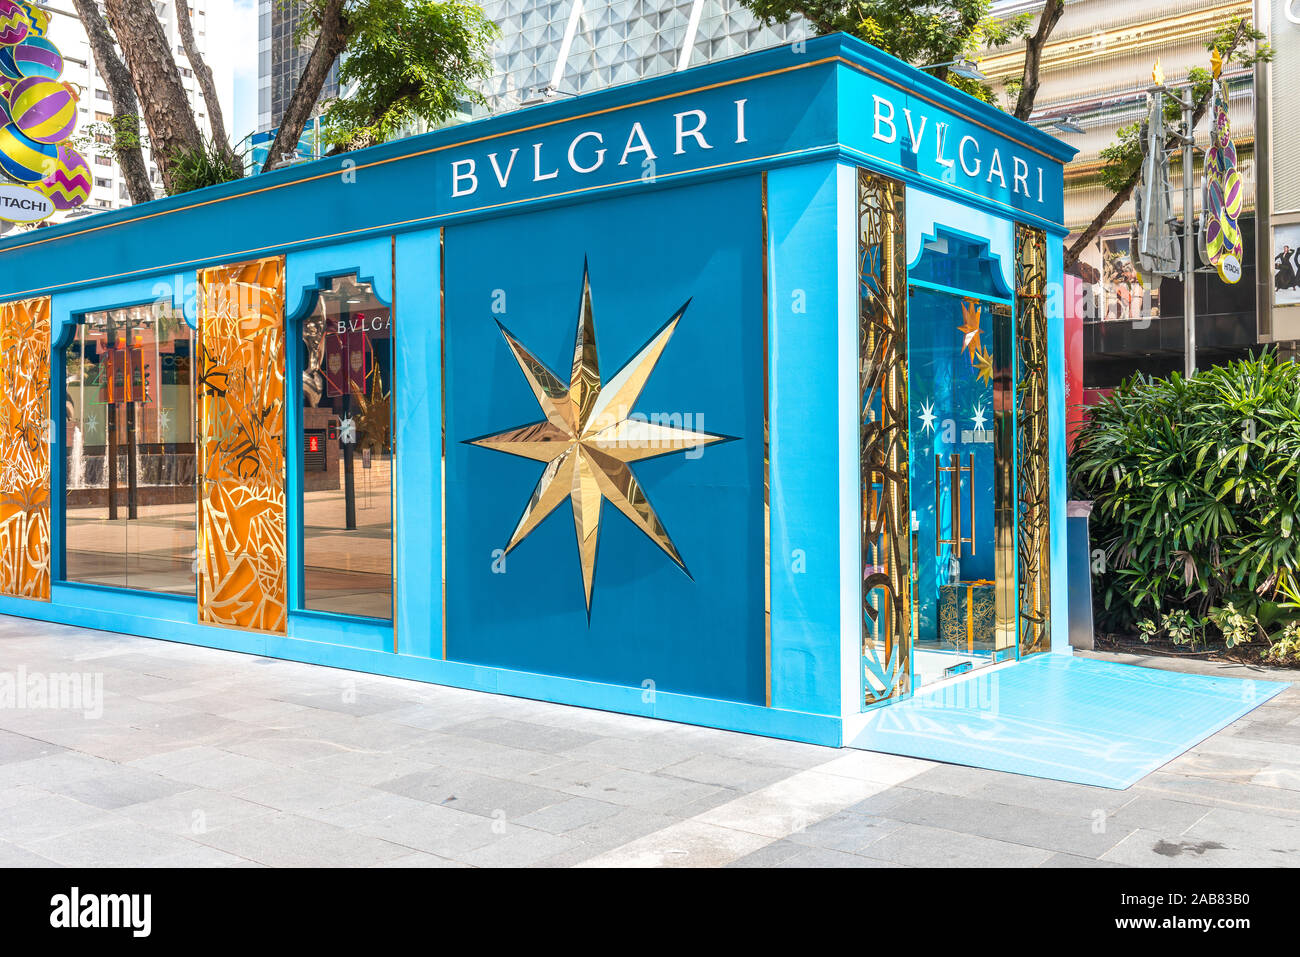 Bvlgari Pop-up Stores in ION Orchard Road Shopping Mall, Singapur. Weihnachtsfeier. Stockfoto